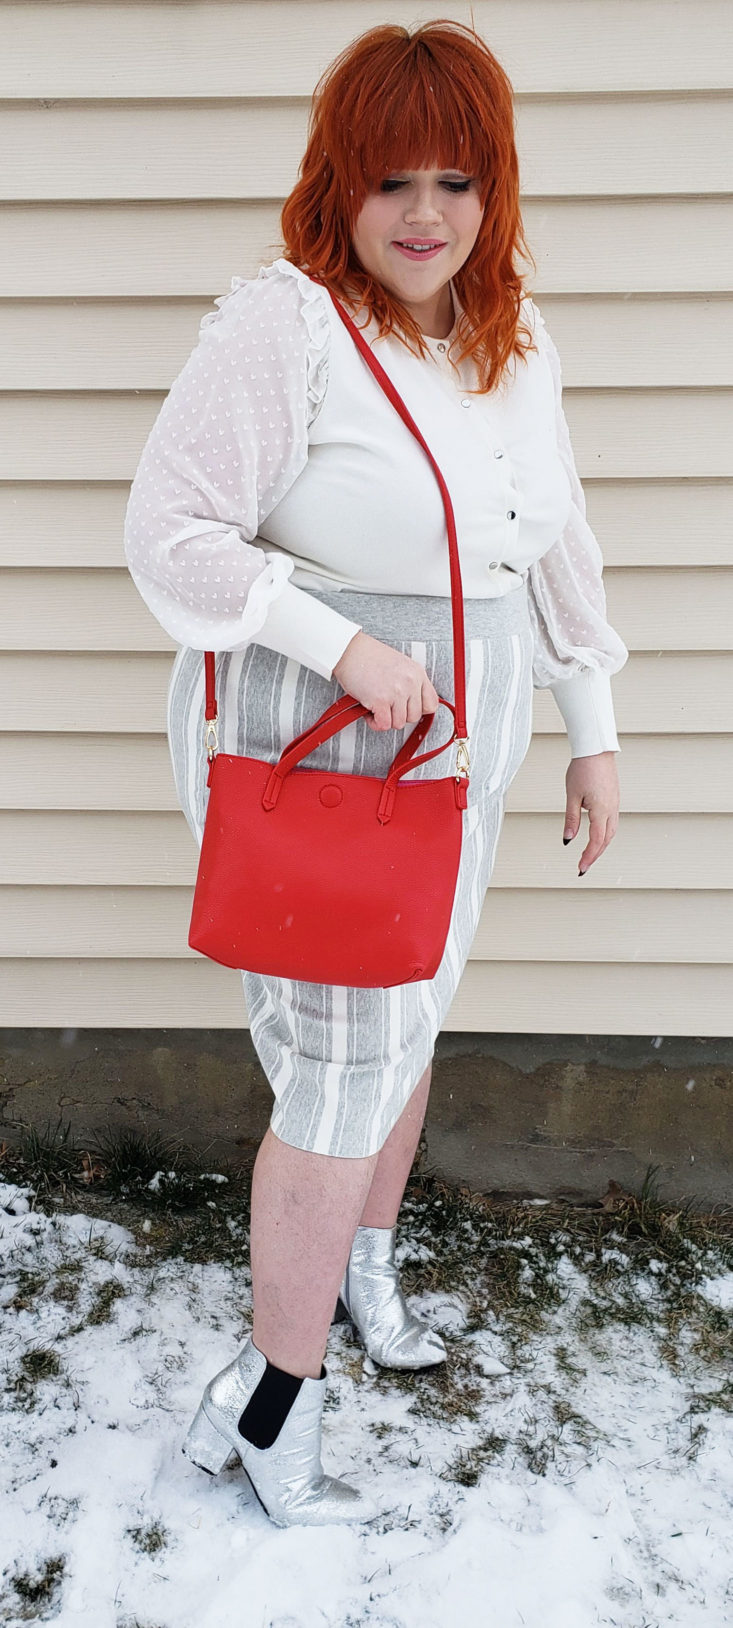 Trunk Club Plus Size Subscription Box Review March 2019 - Faux Leather Crossbody Bag by BP 3 Holding